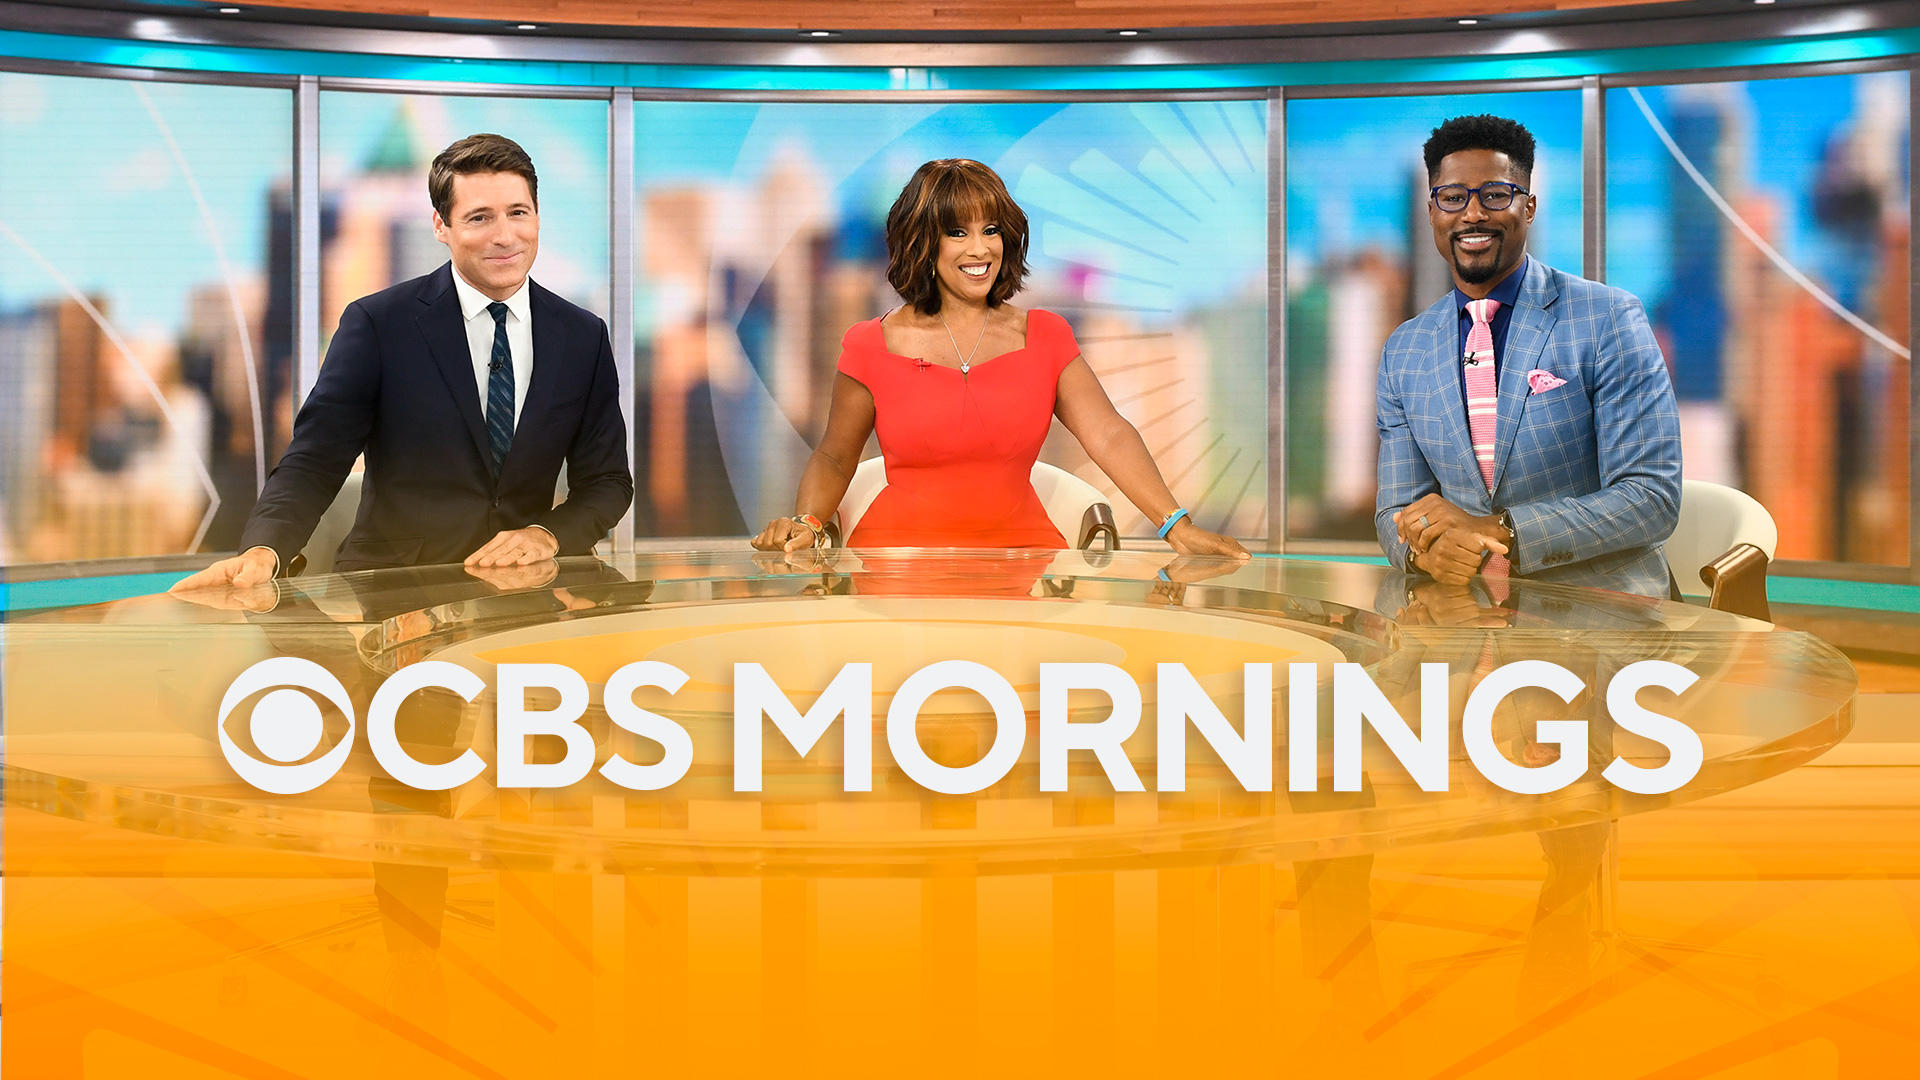 Watch CBS Mornings: Spanx founder sells majority stake in brand - Full show  on CBS